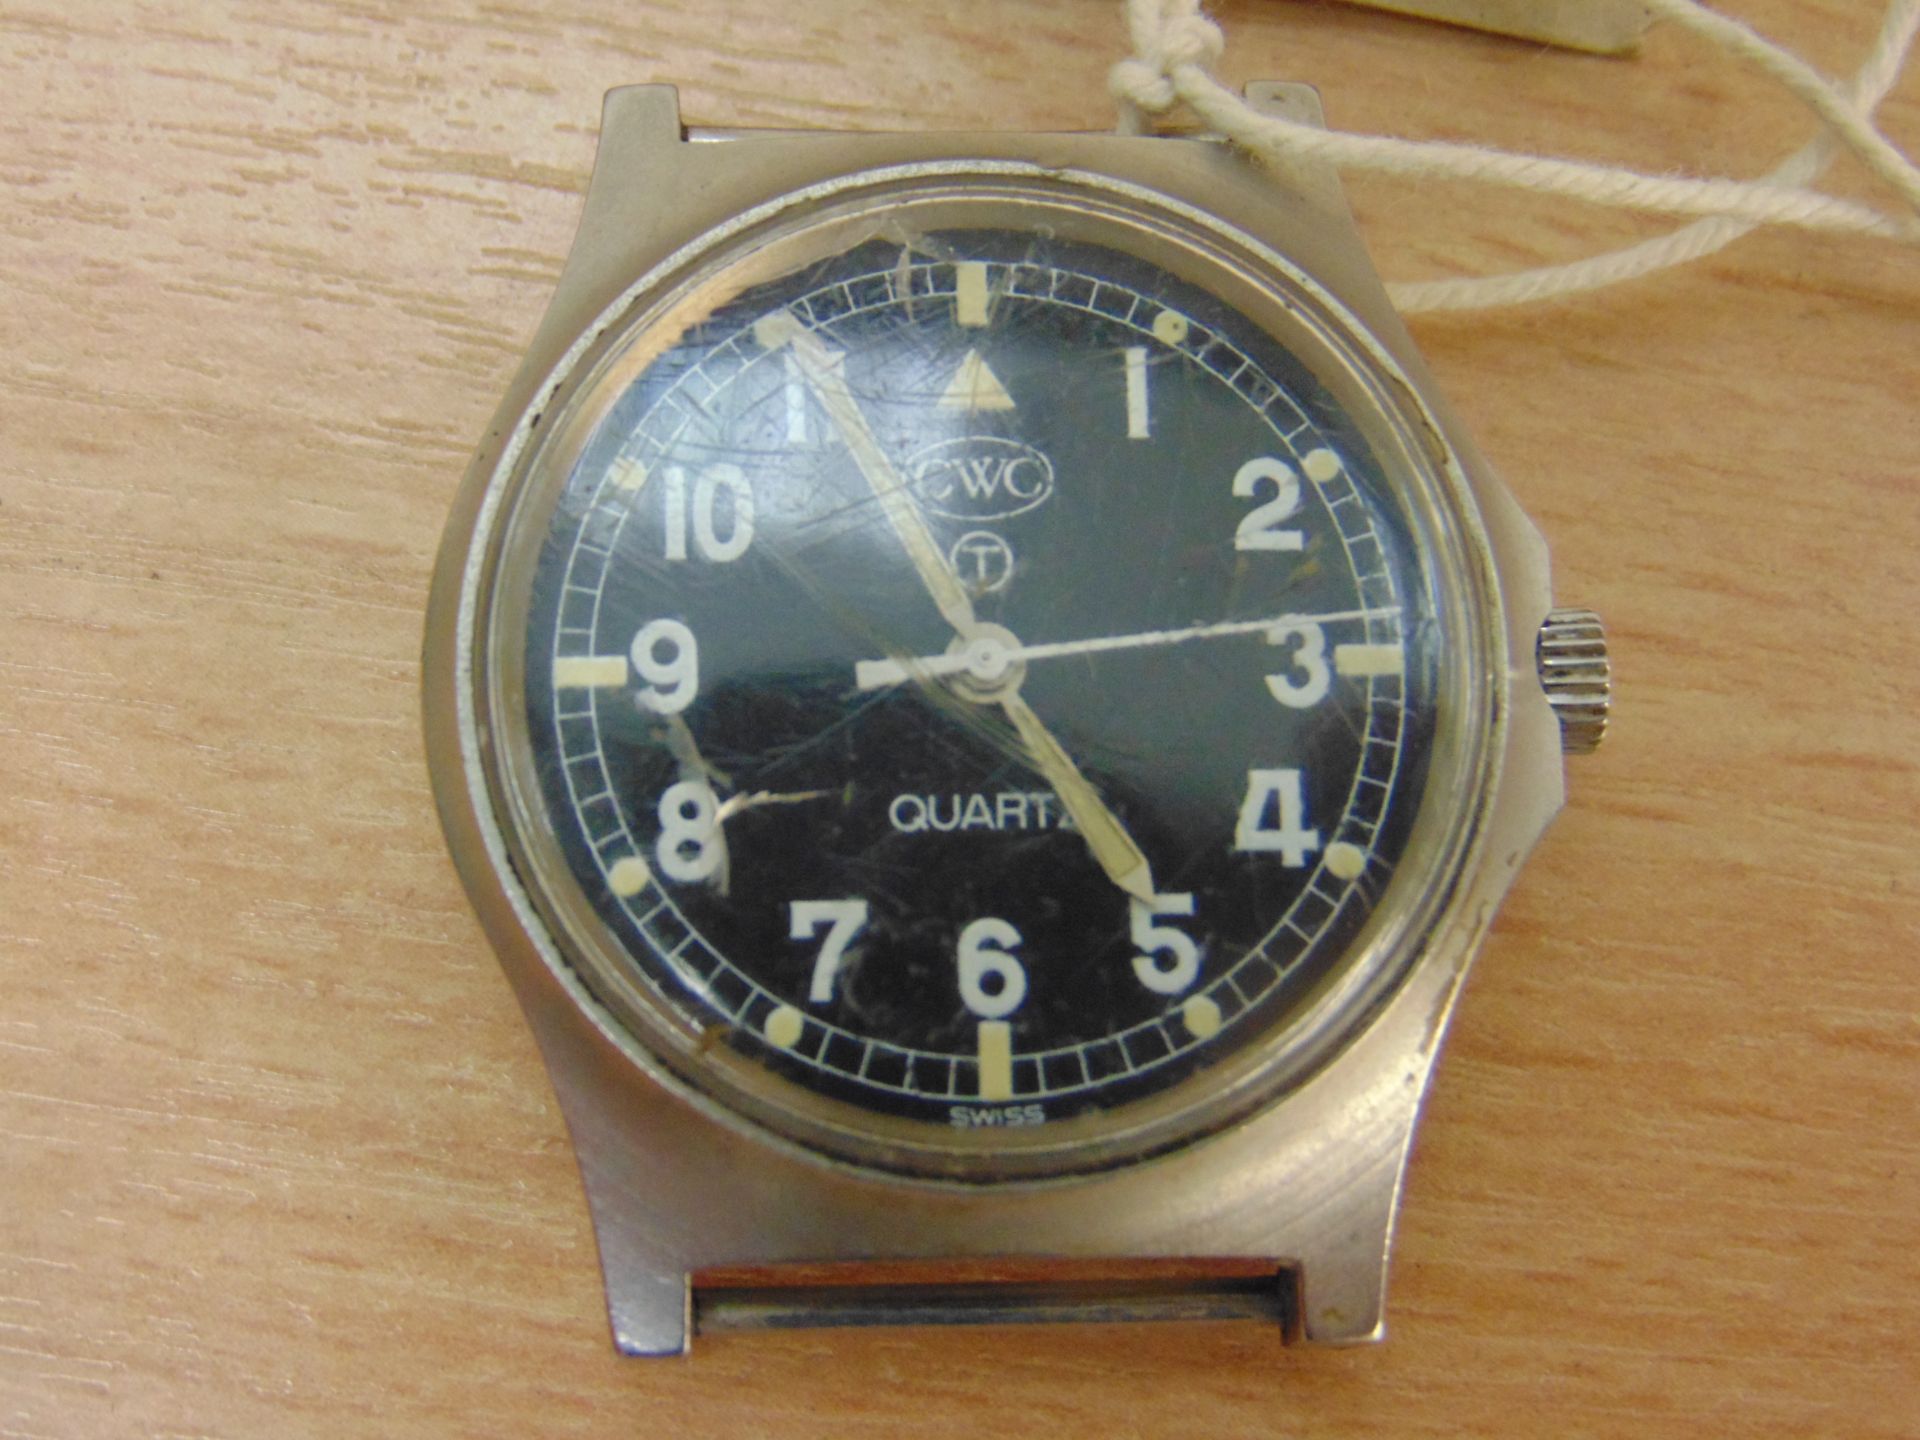 EXTREMELY RARE CWC FAT BOY W10 SERVICE WATCH